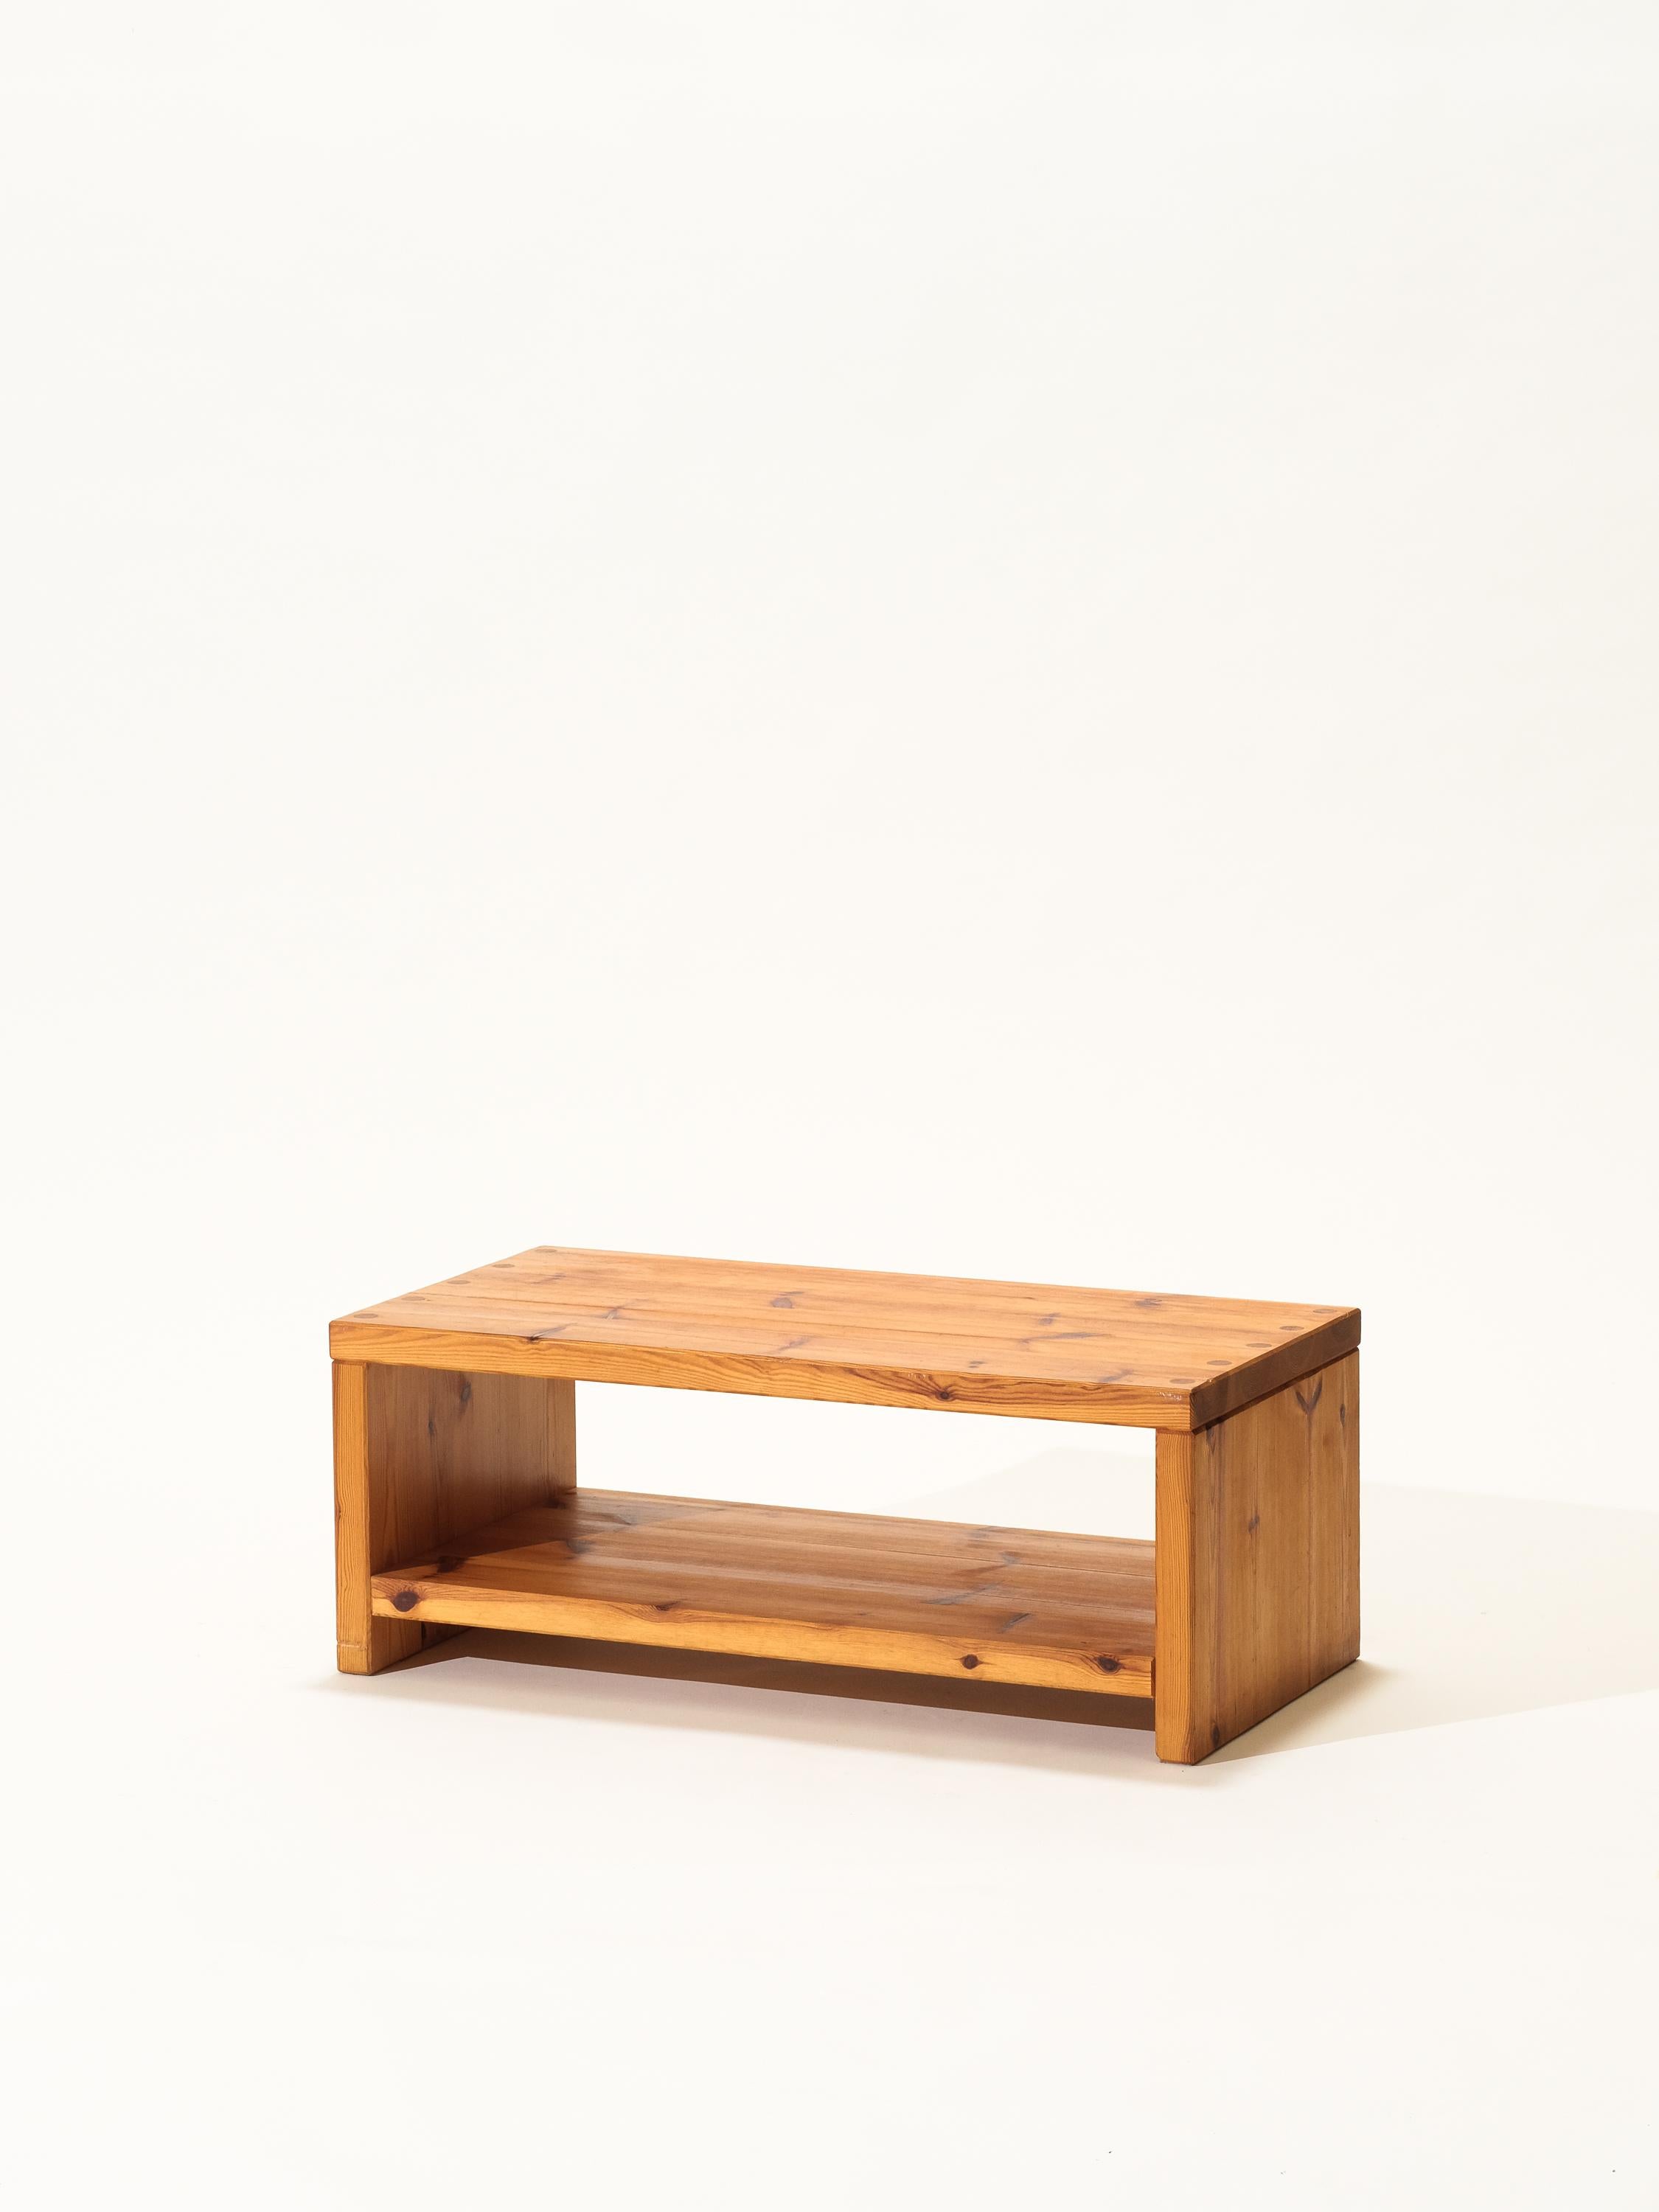 Rectangular side table or bench in solid pine, crafted by Swedish designer Christer Larsson for Sven Larsson Möbelshop in 1970s.

Fine craftmanship, perfectly suited for any interior style. A Modern, Scandinavian, Classic or an Art deco home